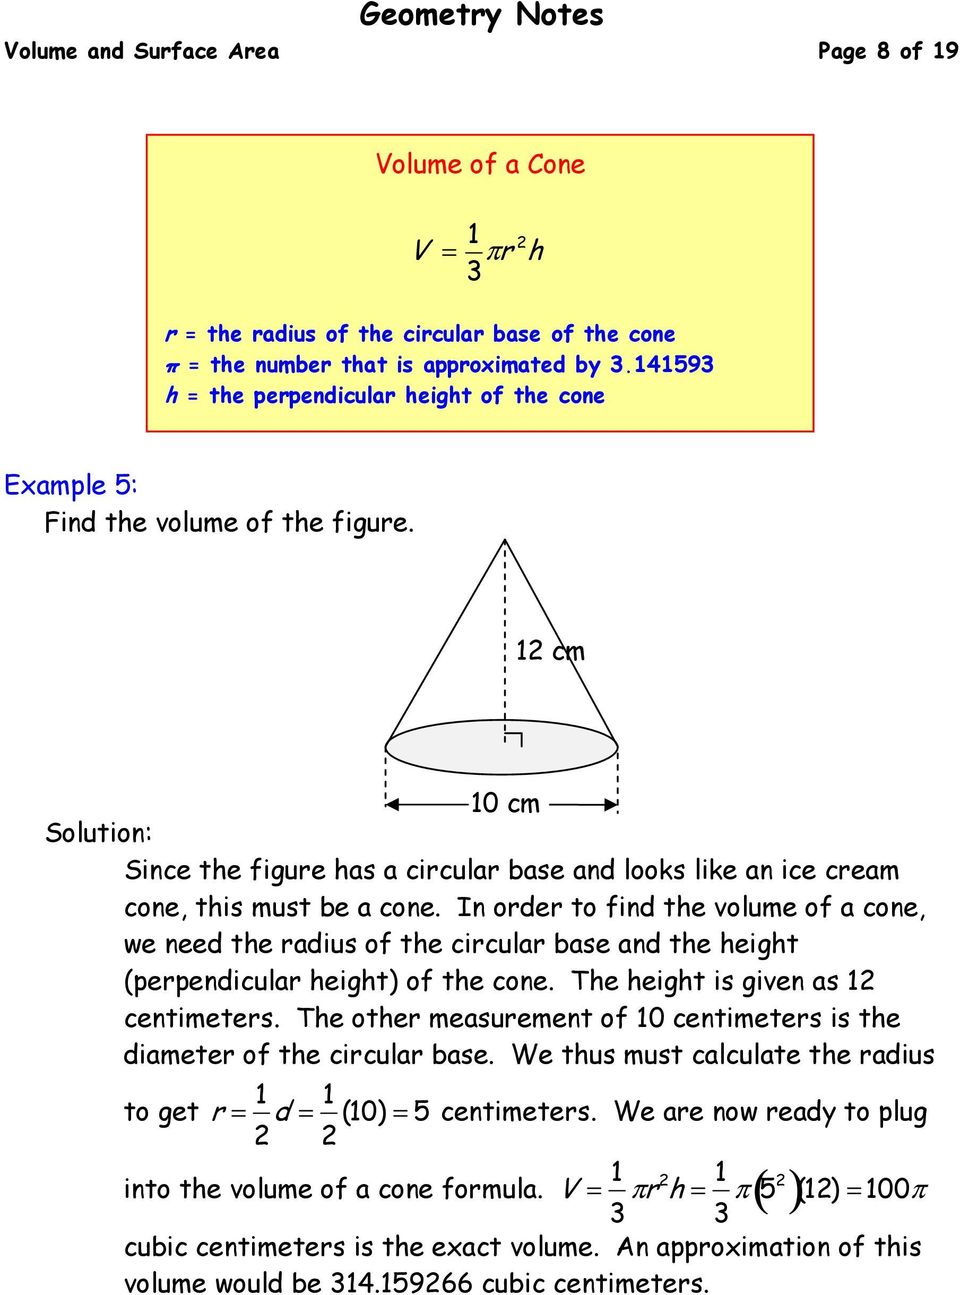 In order to find the volume of a cone, we need the radius of the circular base and the height (perpendicular height) of the cone. The height is given as 1 centimeters.